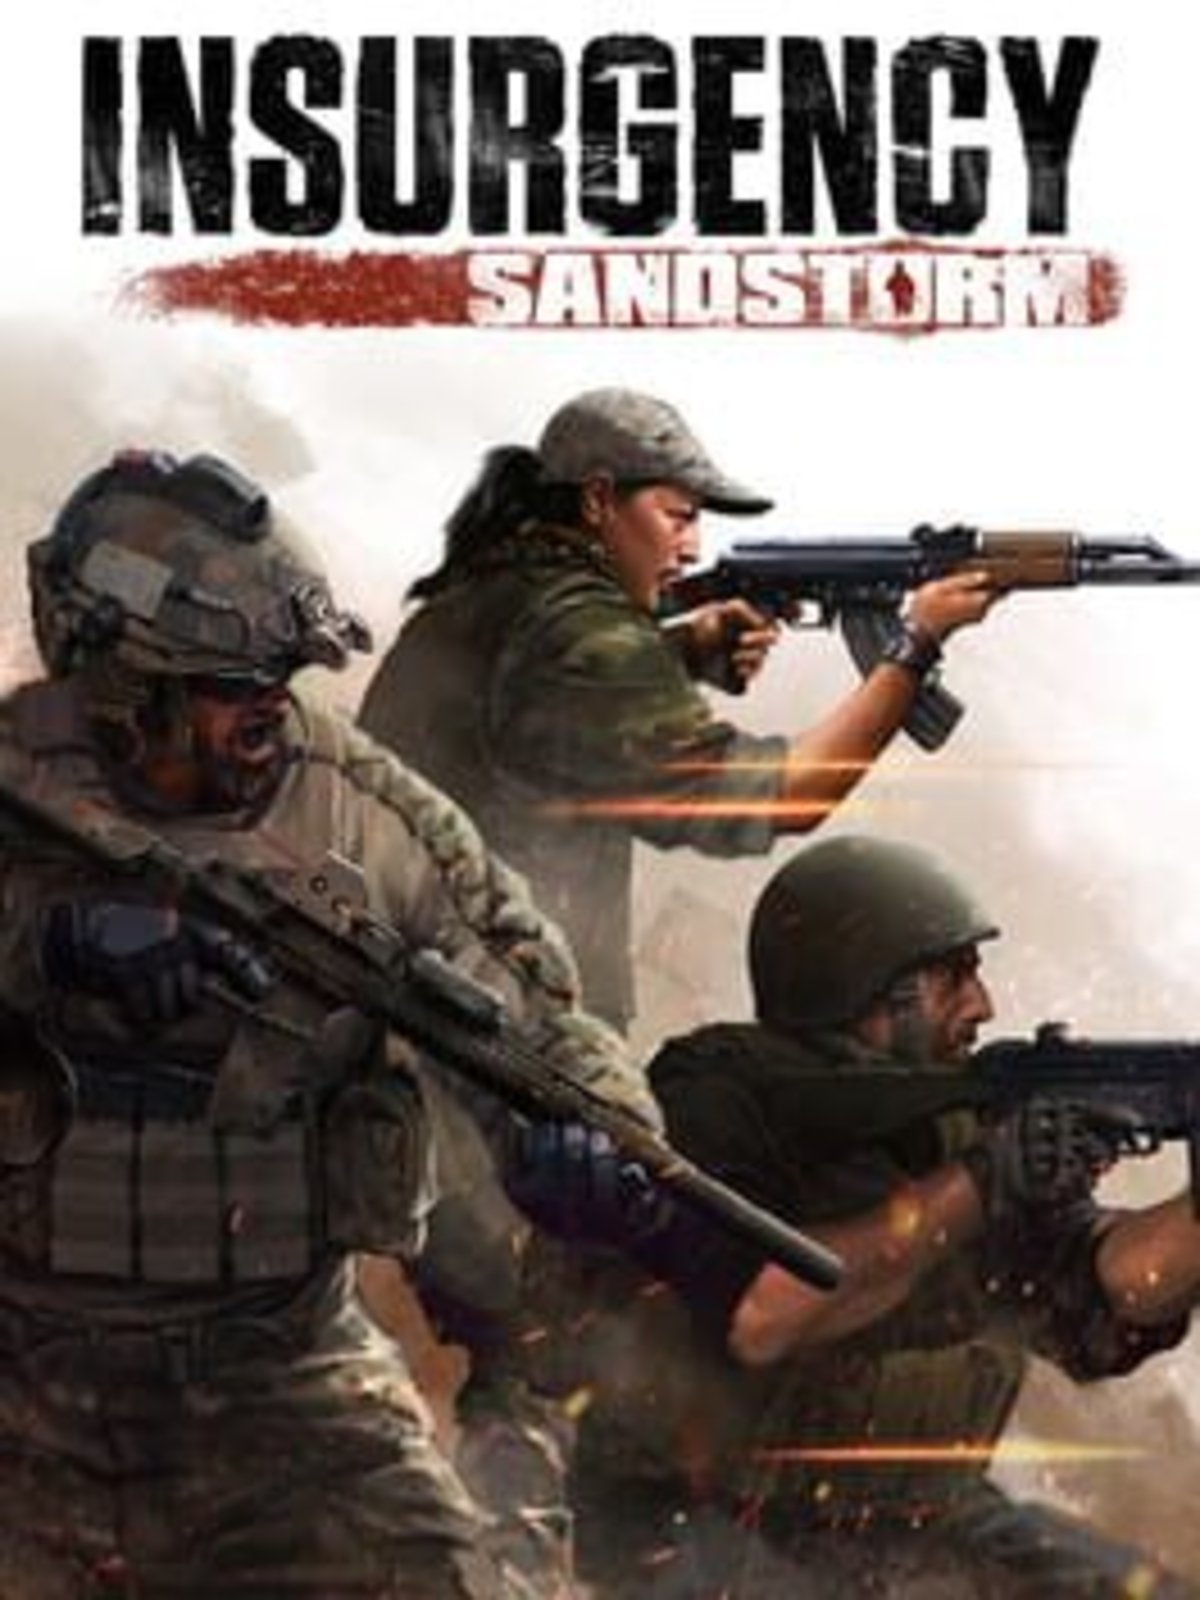 Insurgency Review: Sandstorm - Tactical Warfare With Realistic Gunfights